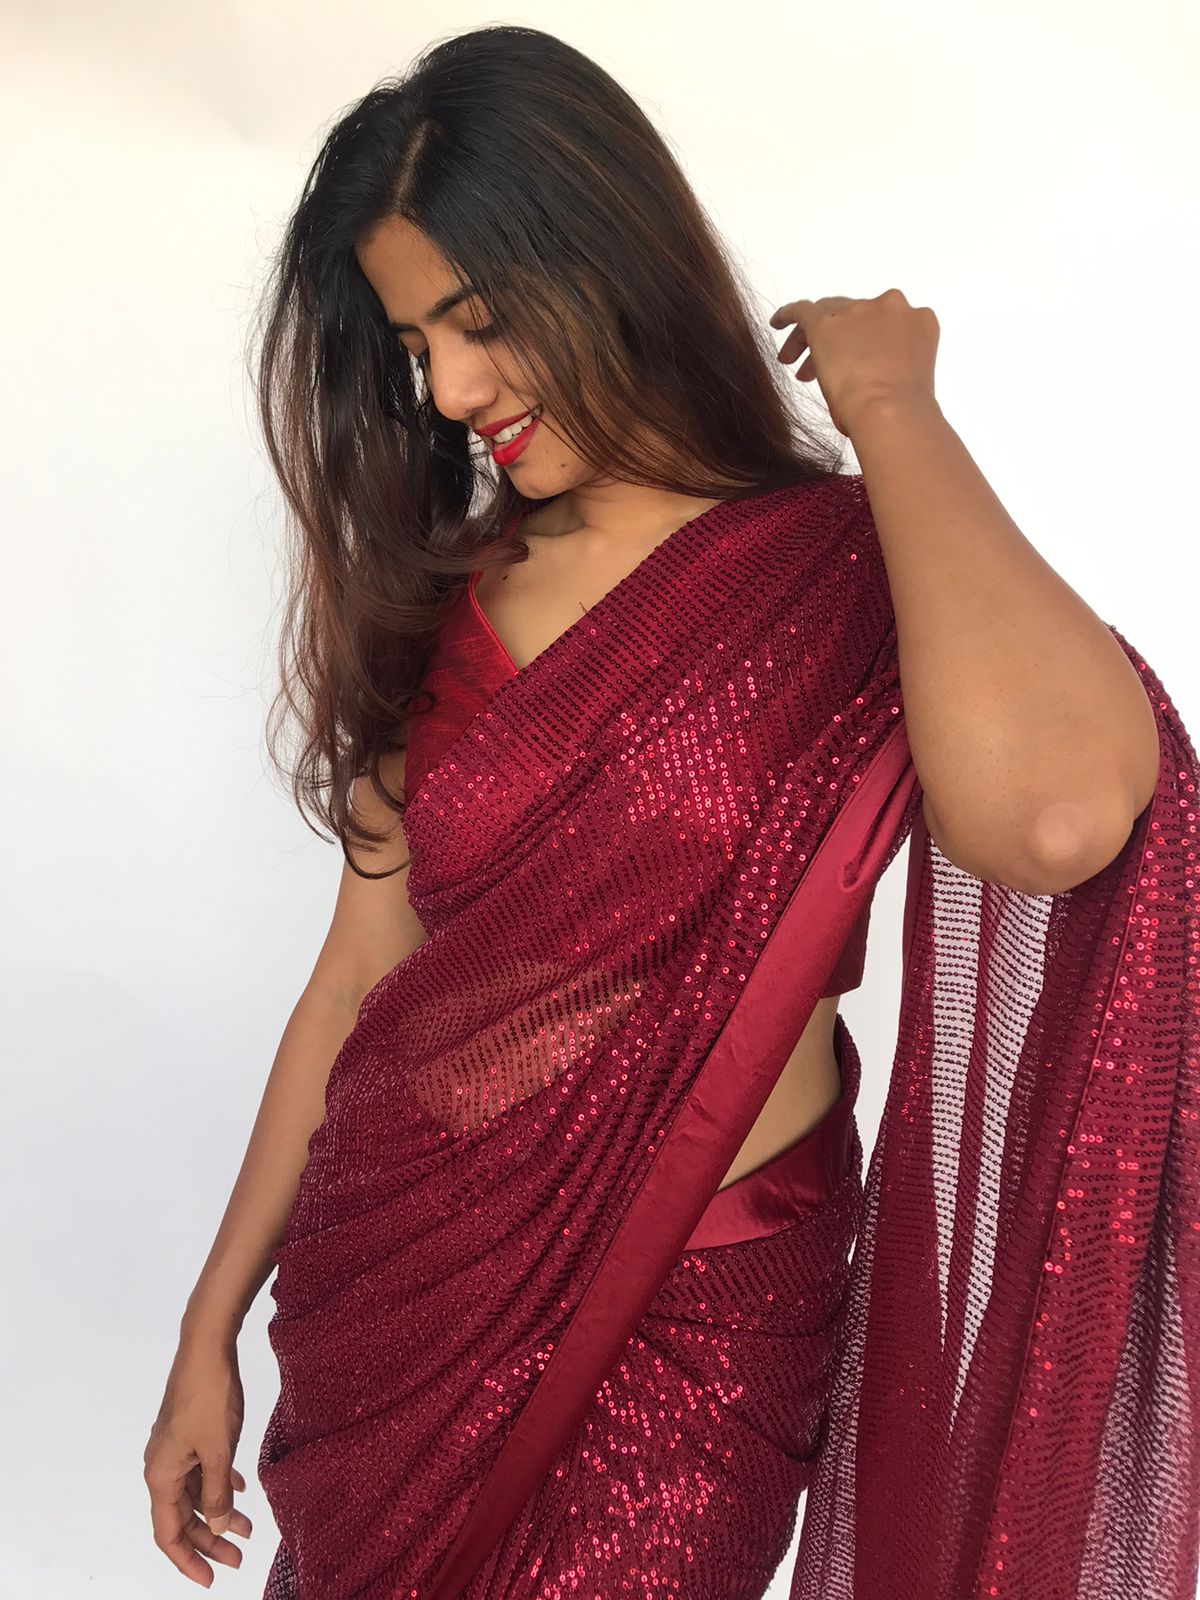 How To Choose A Perfect Saree For Your Body Type